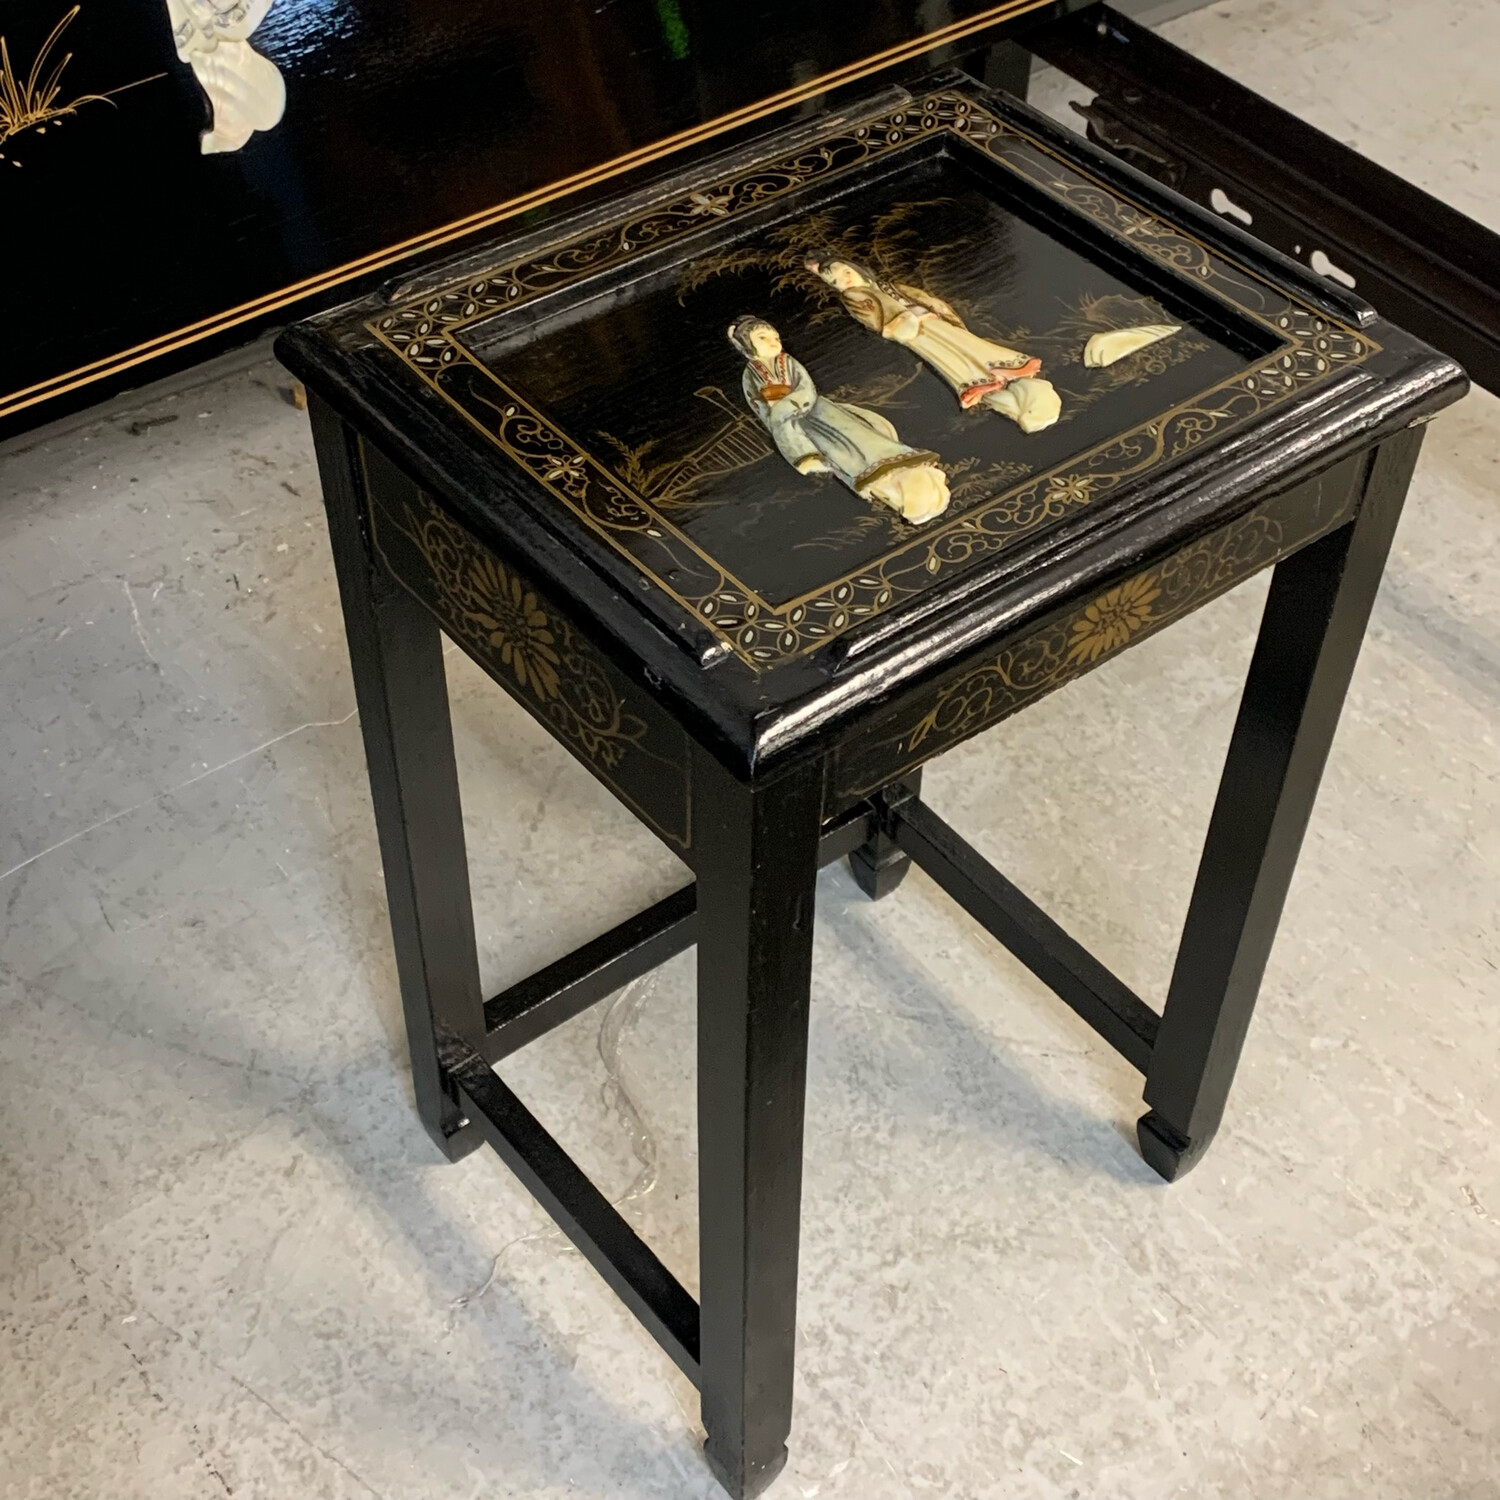 Asian Inspired Side Table With Mother OF Pearl Figures